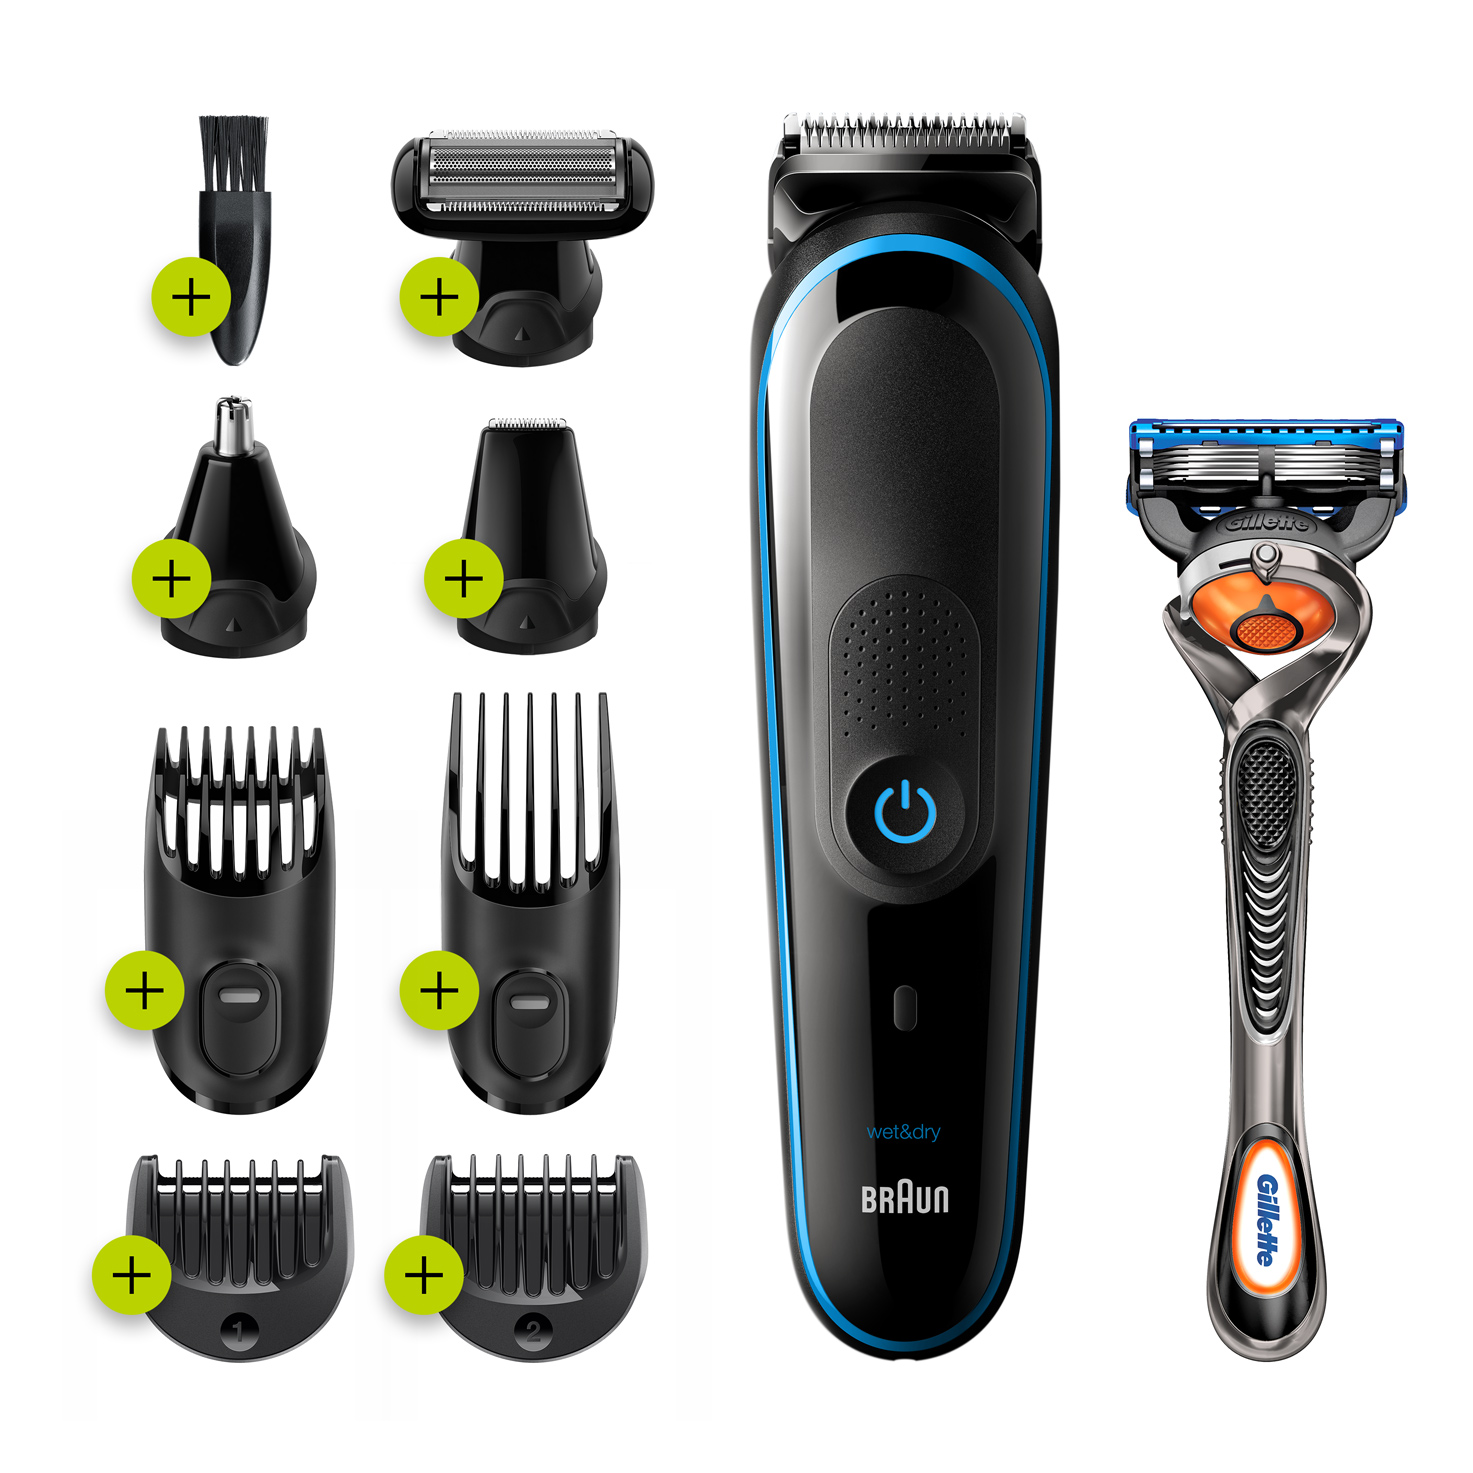 gillette all in one trimmer